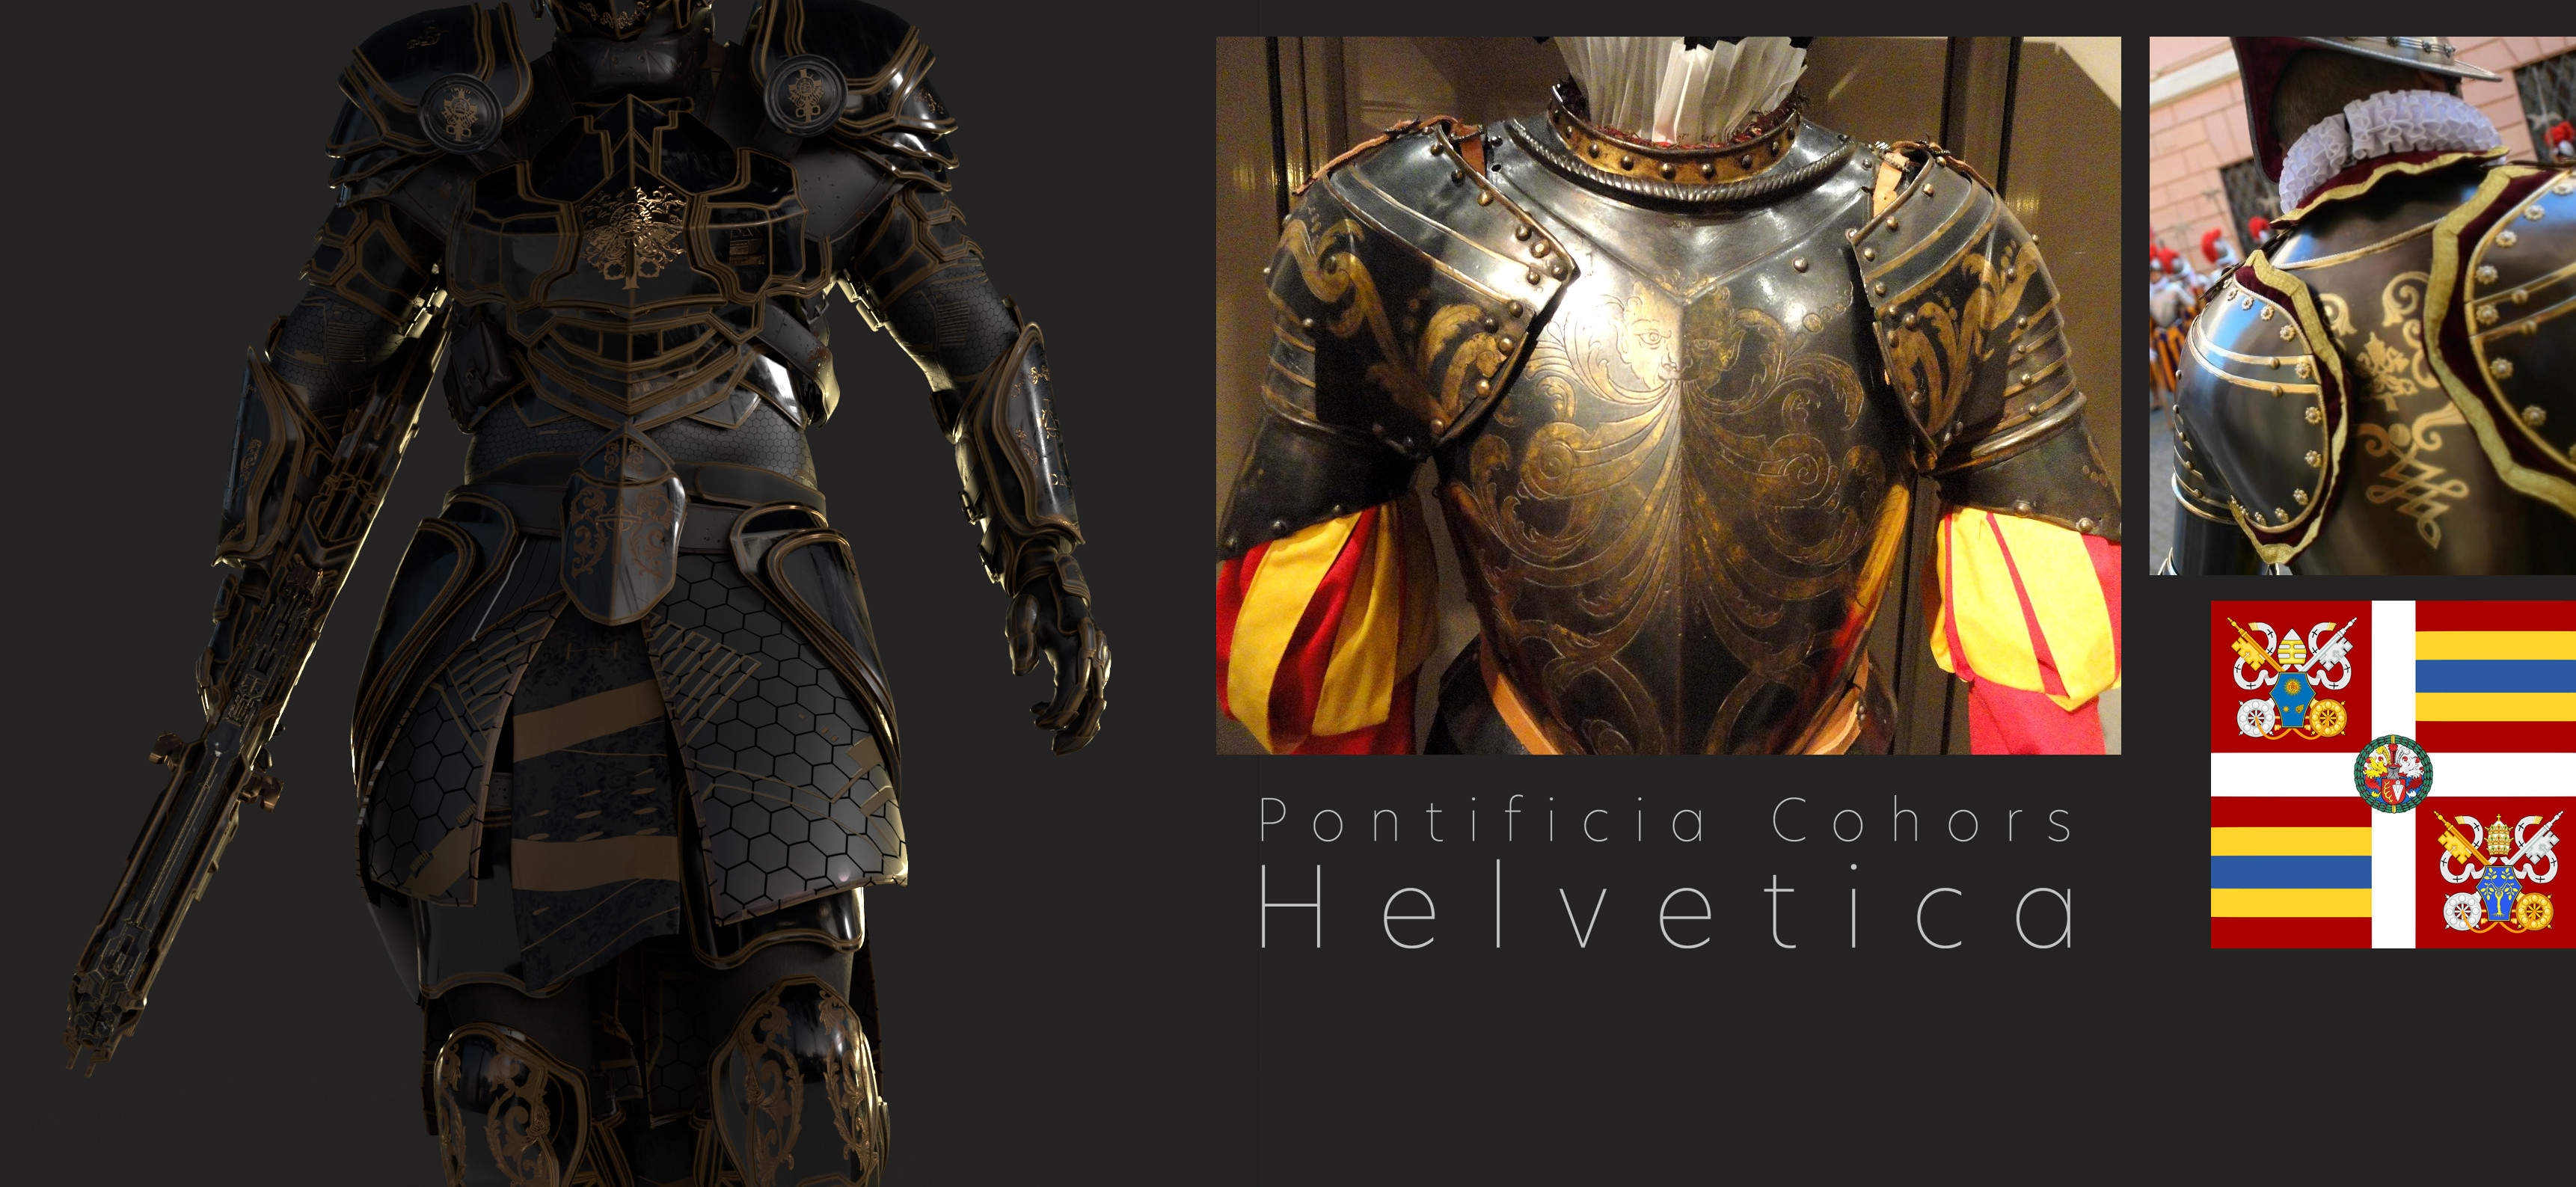 Clean black suit version &amp; some research based on the real "modern" Swiss guard(Vatican)